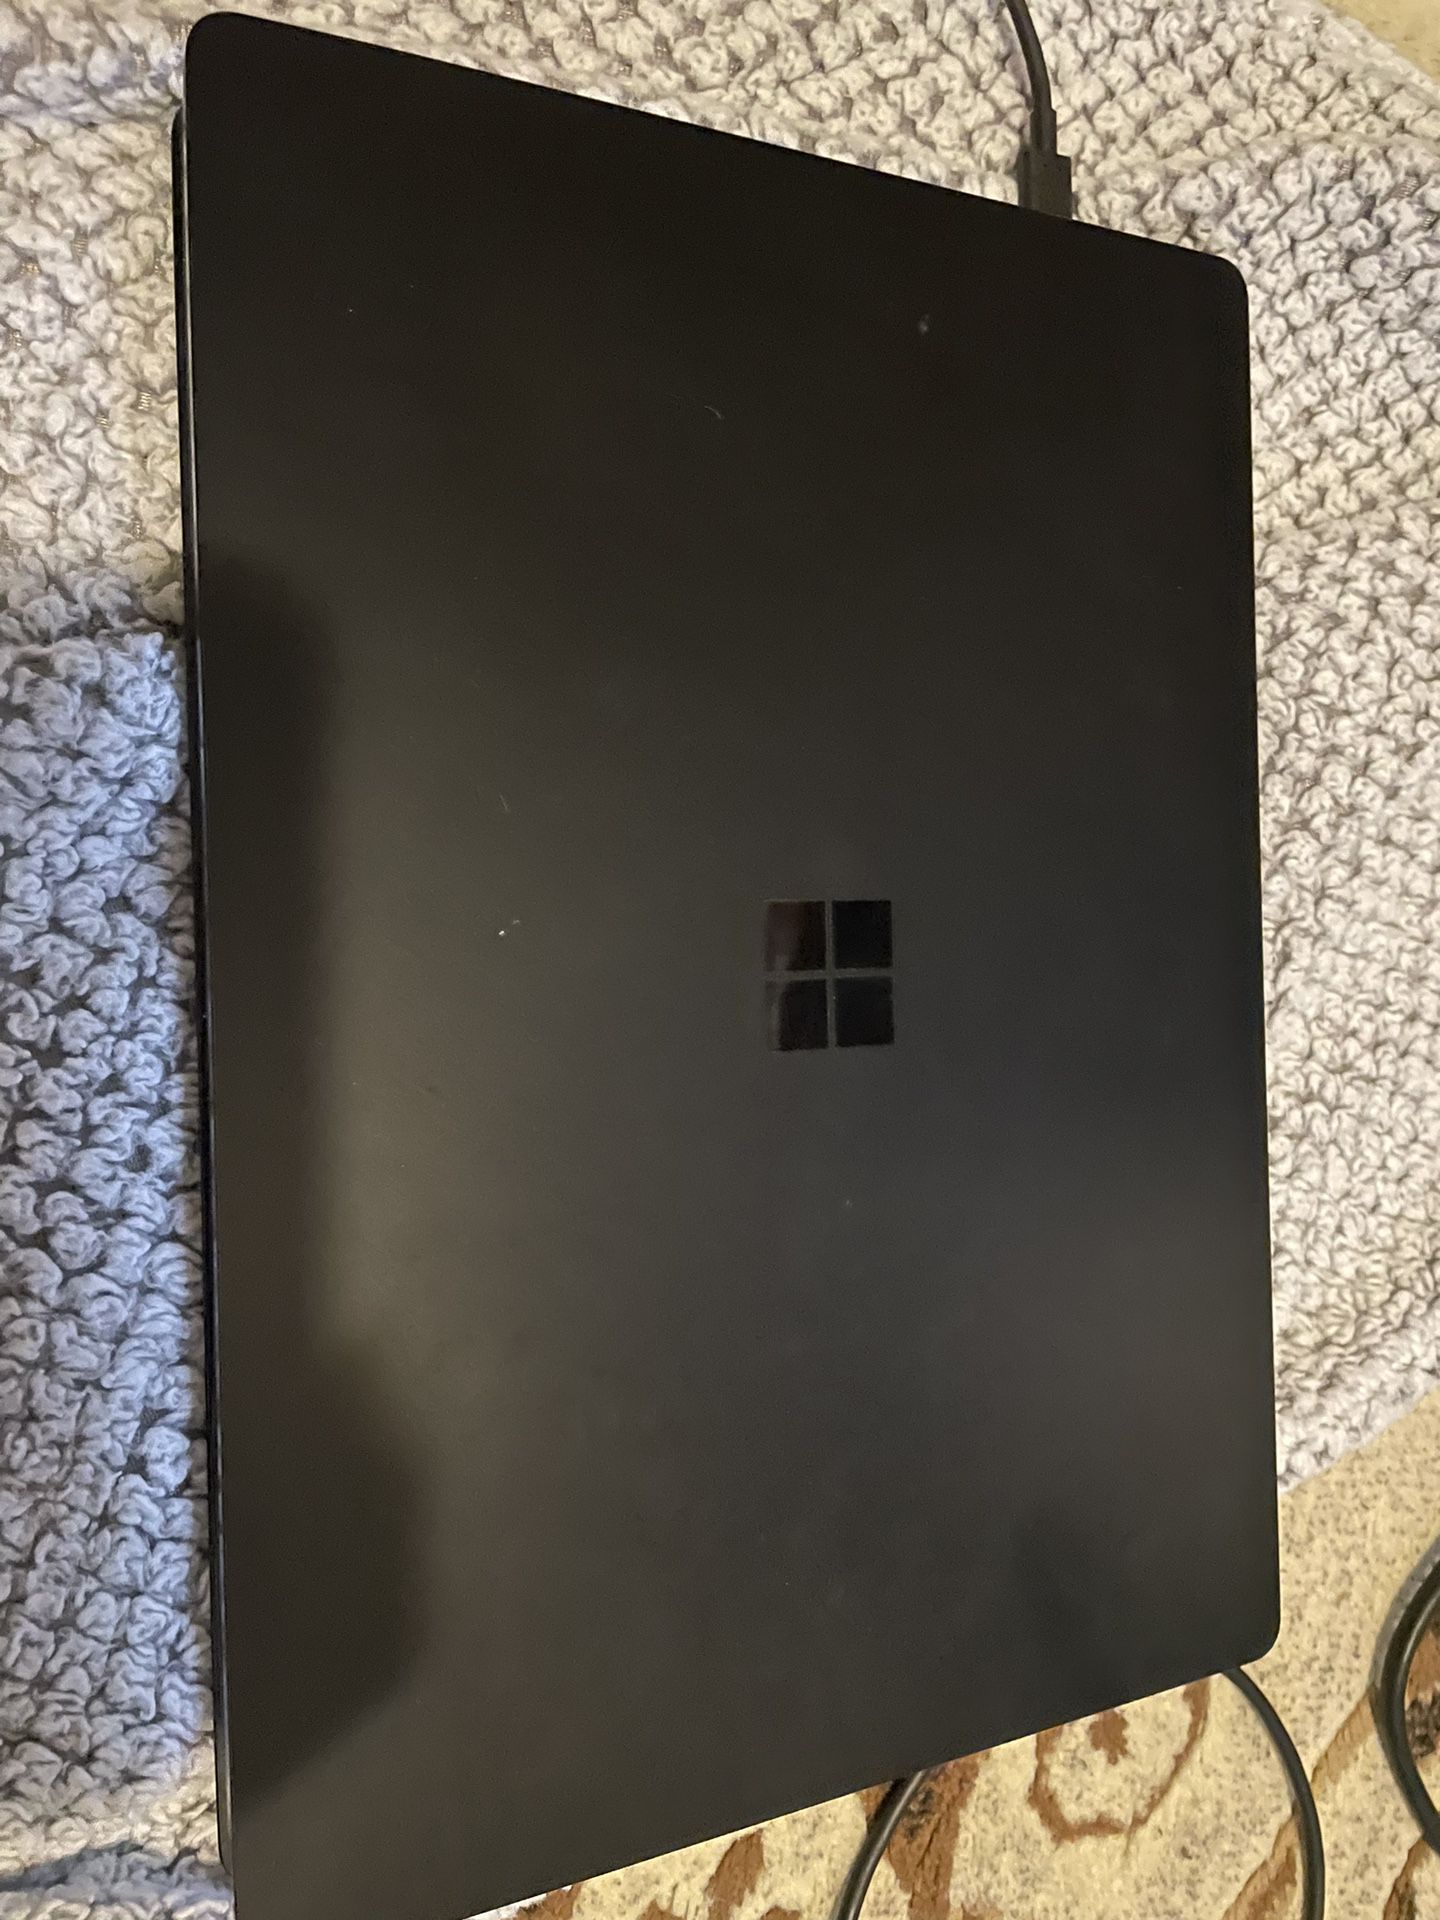 Microsoft Surface Laptop 3 black 13.5” Touch-Screen – Intel Core i7 - 16GB - 512GB Solid